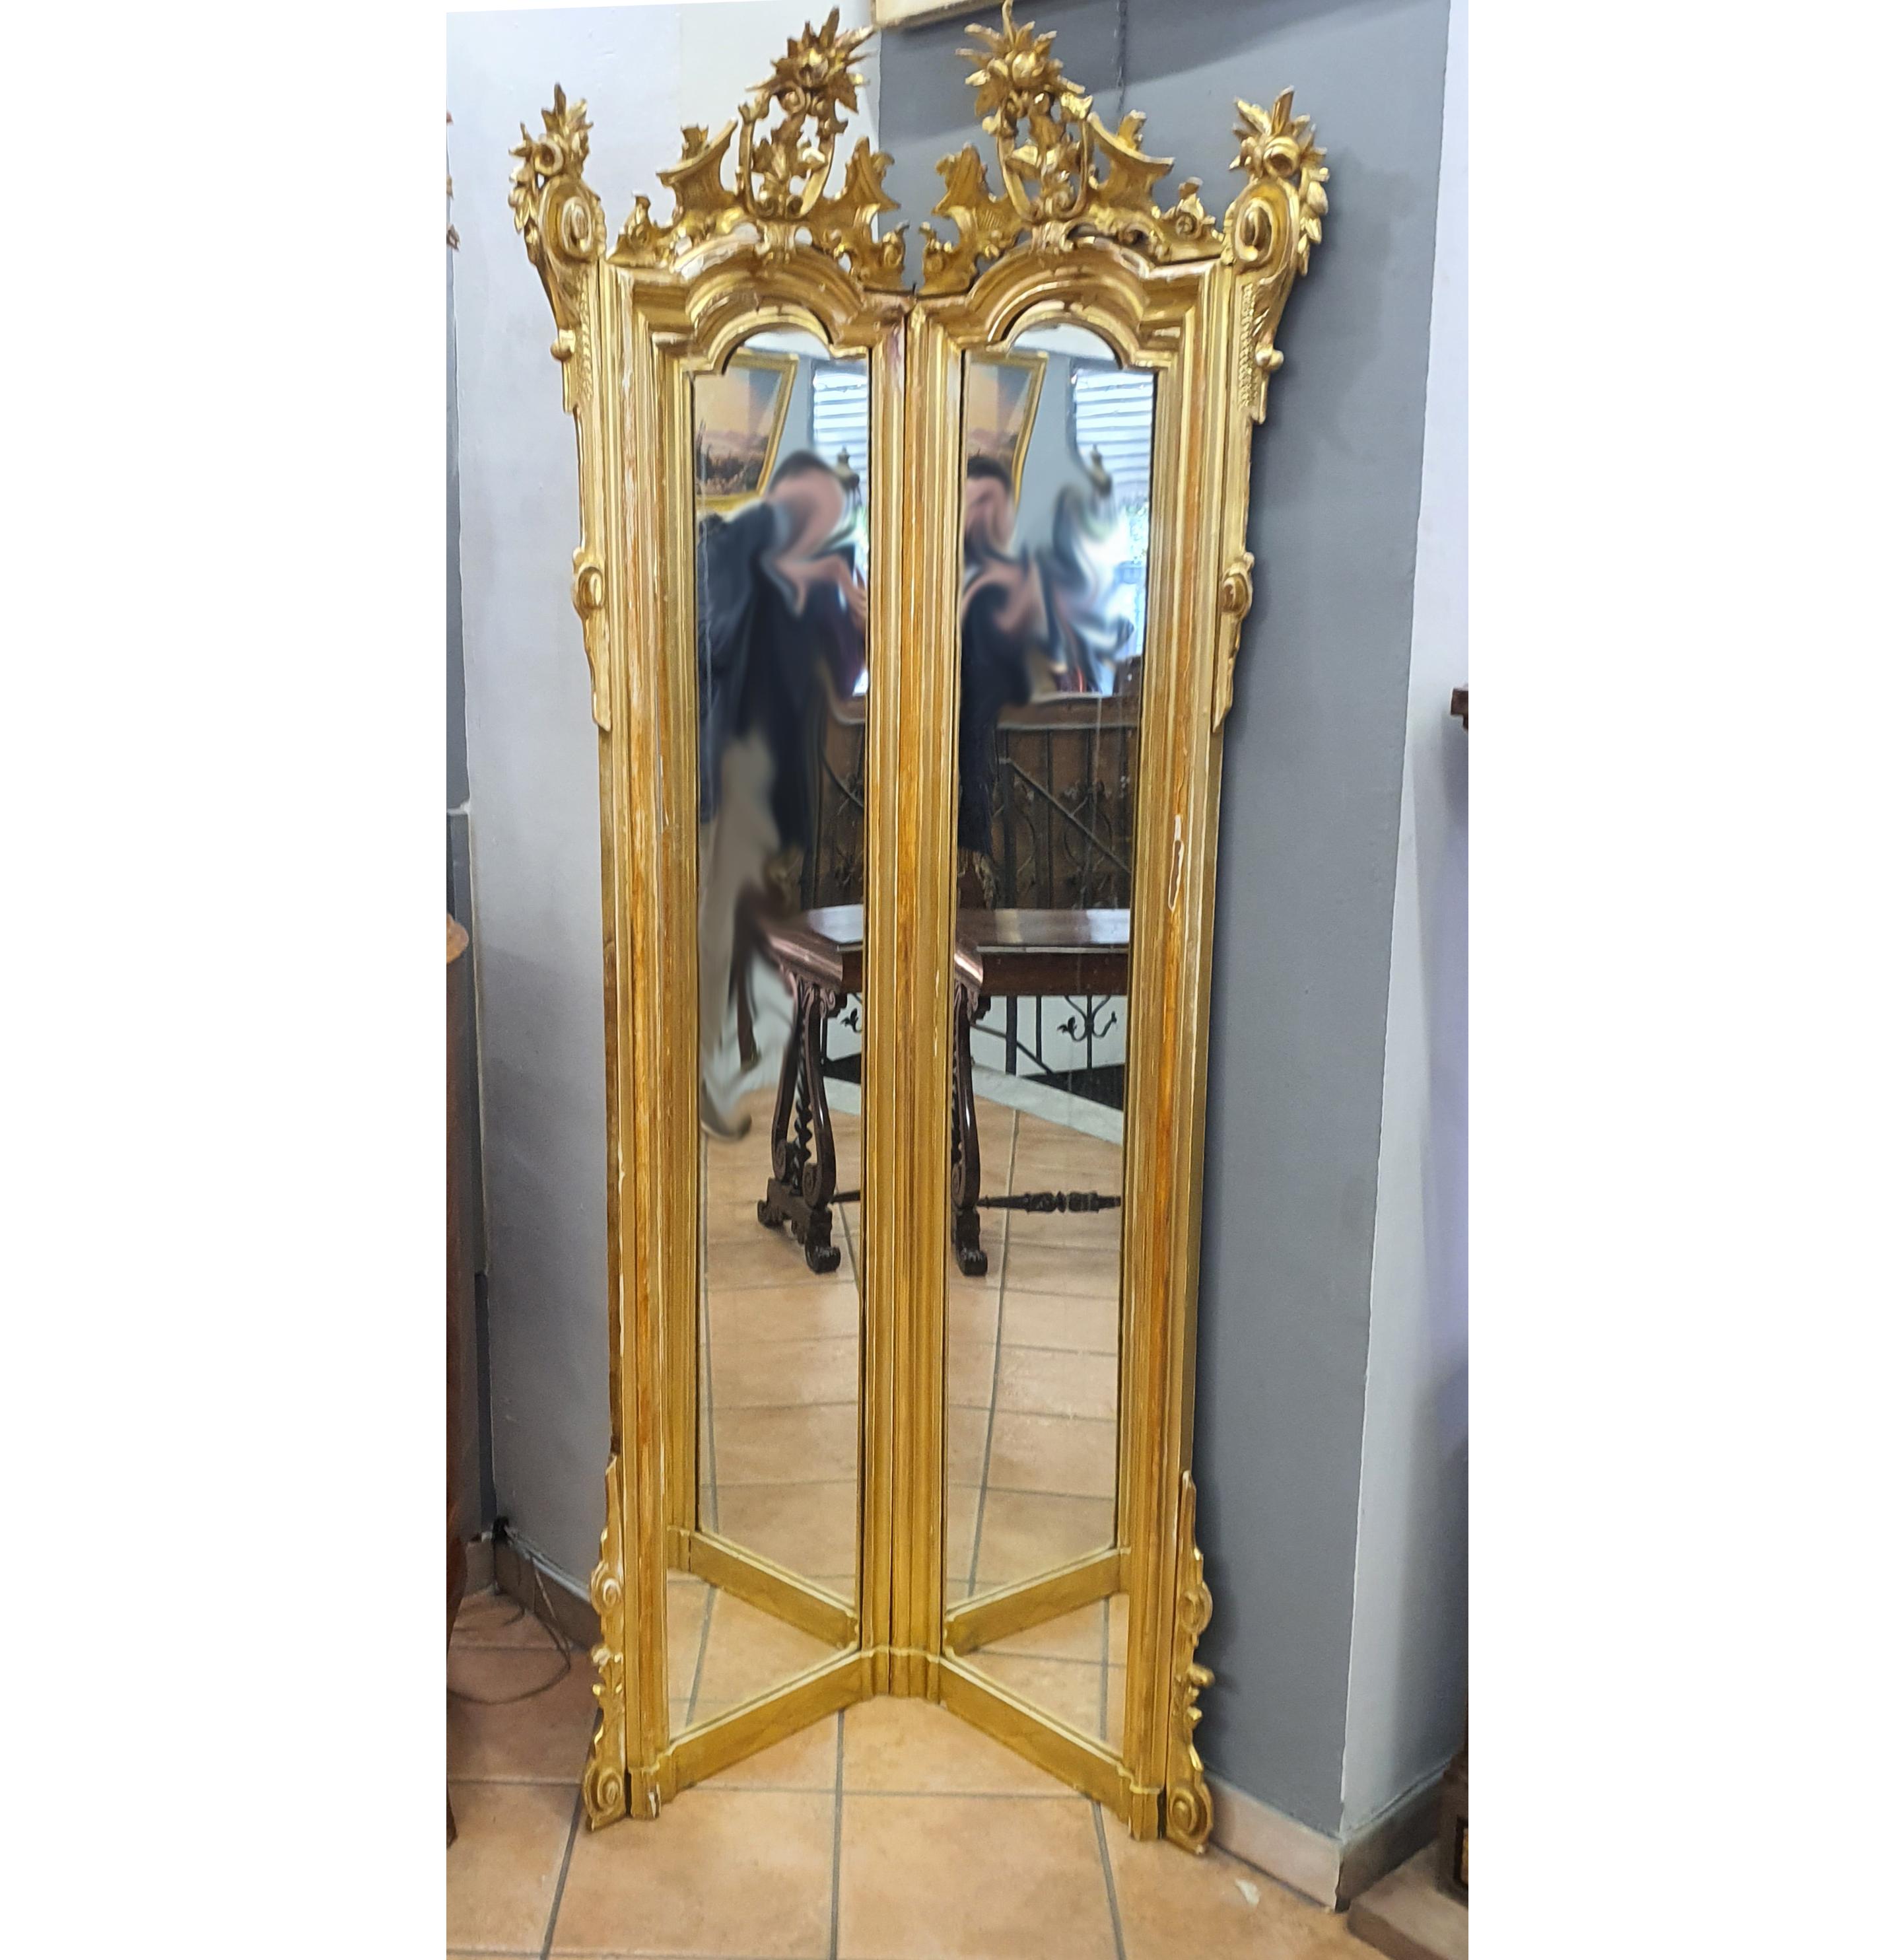 Elegant and unique corner floor mirror, made of gilded wood with pure gold leaf. It comes from an important Italian noble residence.